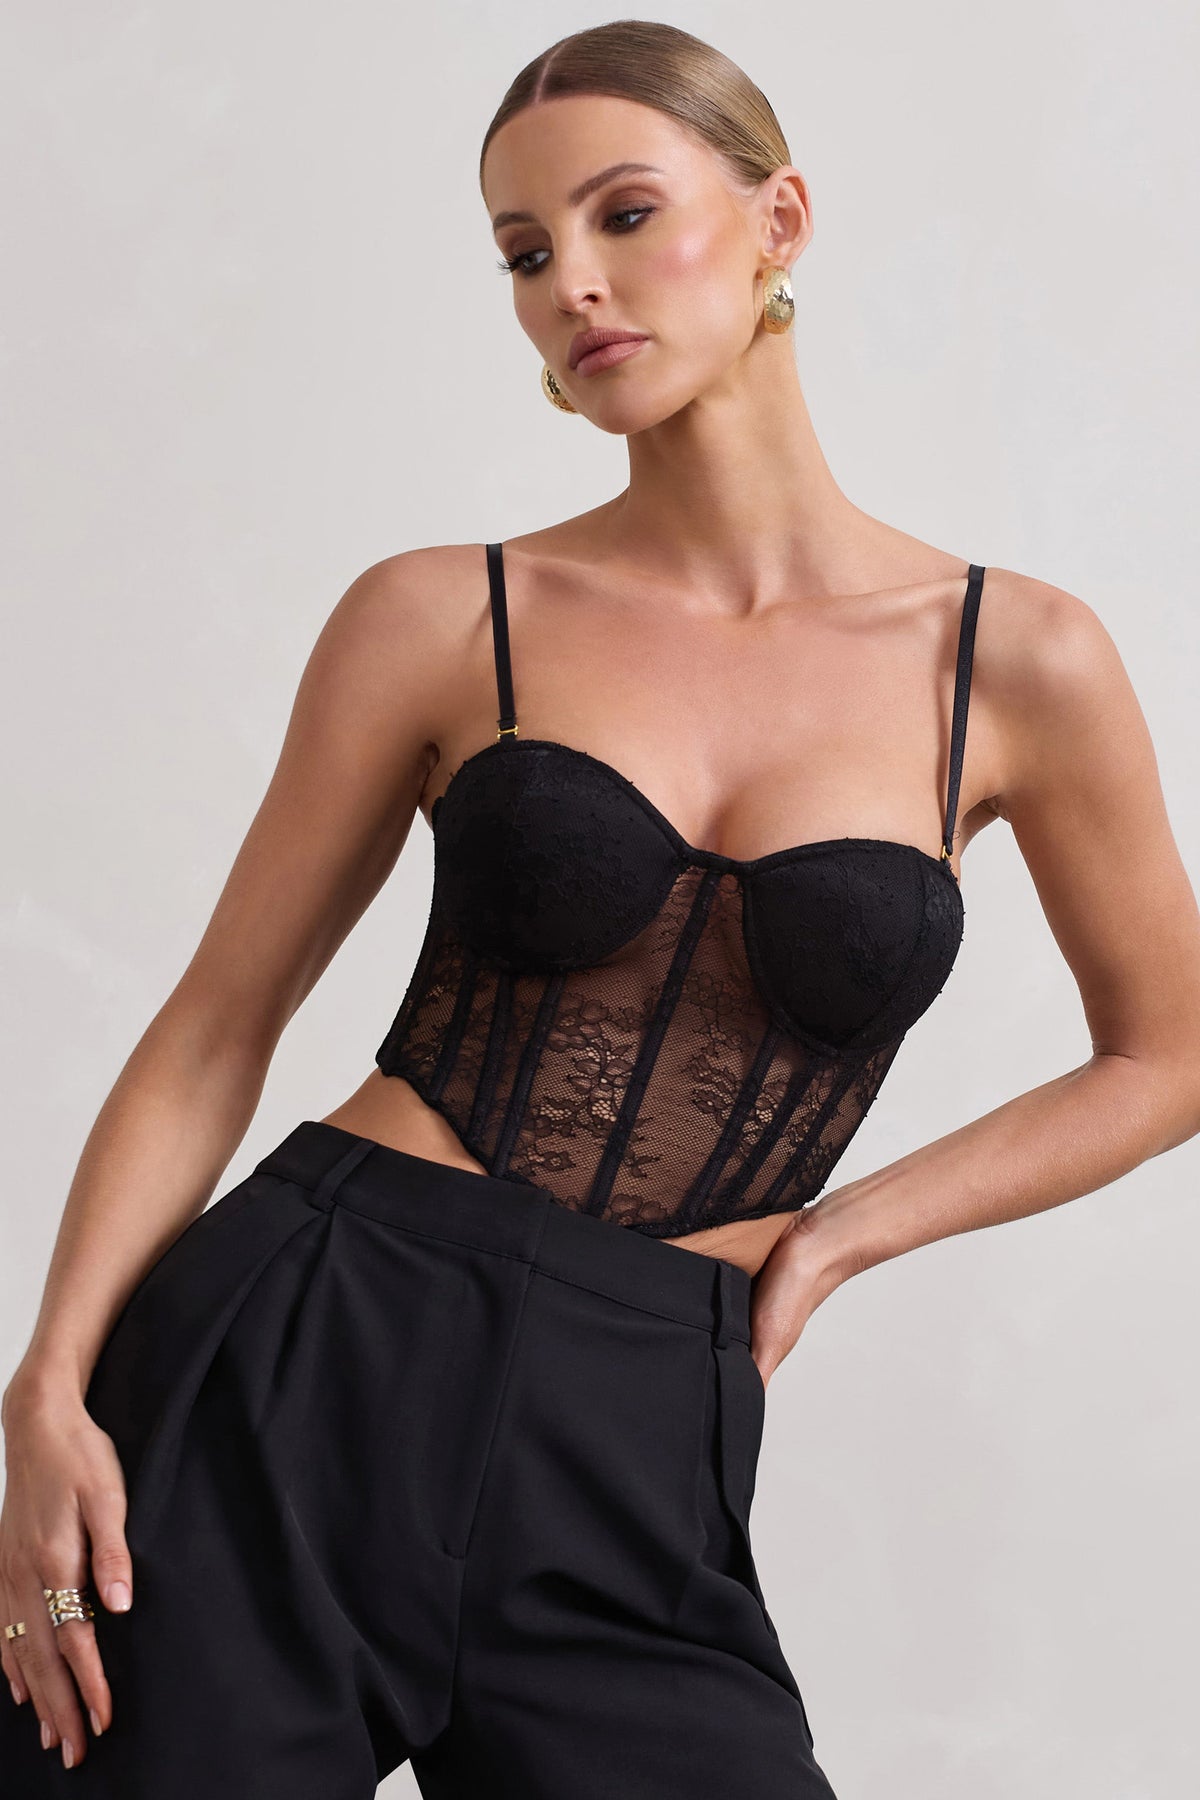 Black Lace Tube Top Bustier, See Through Elastic Lace Bandeau